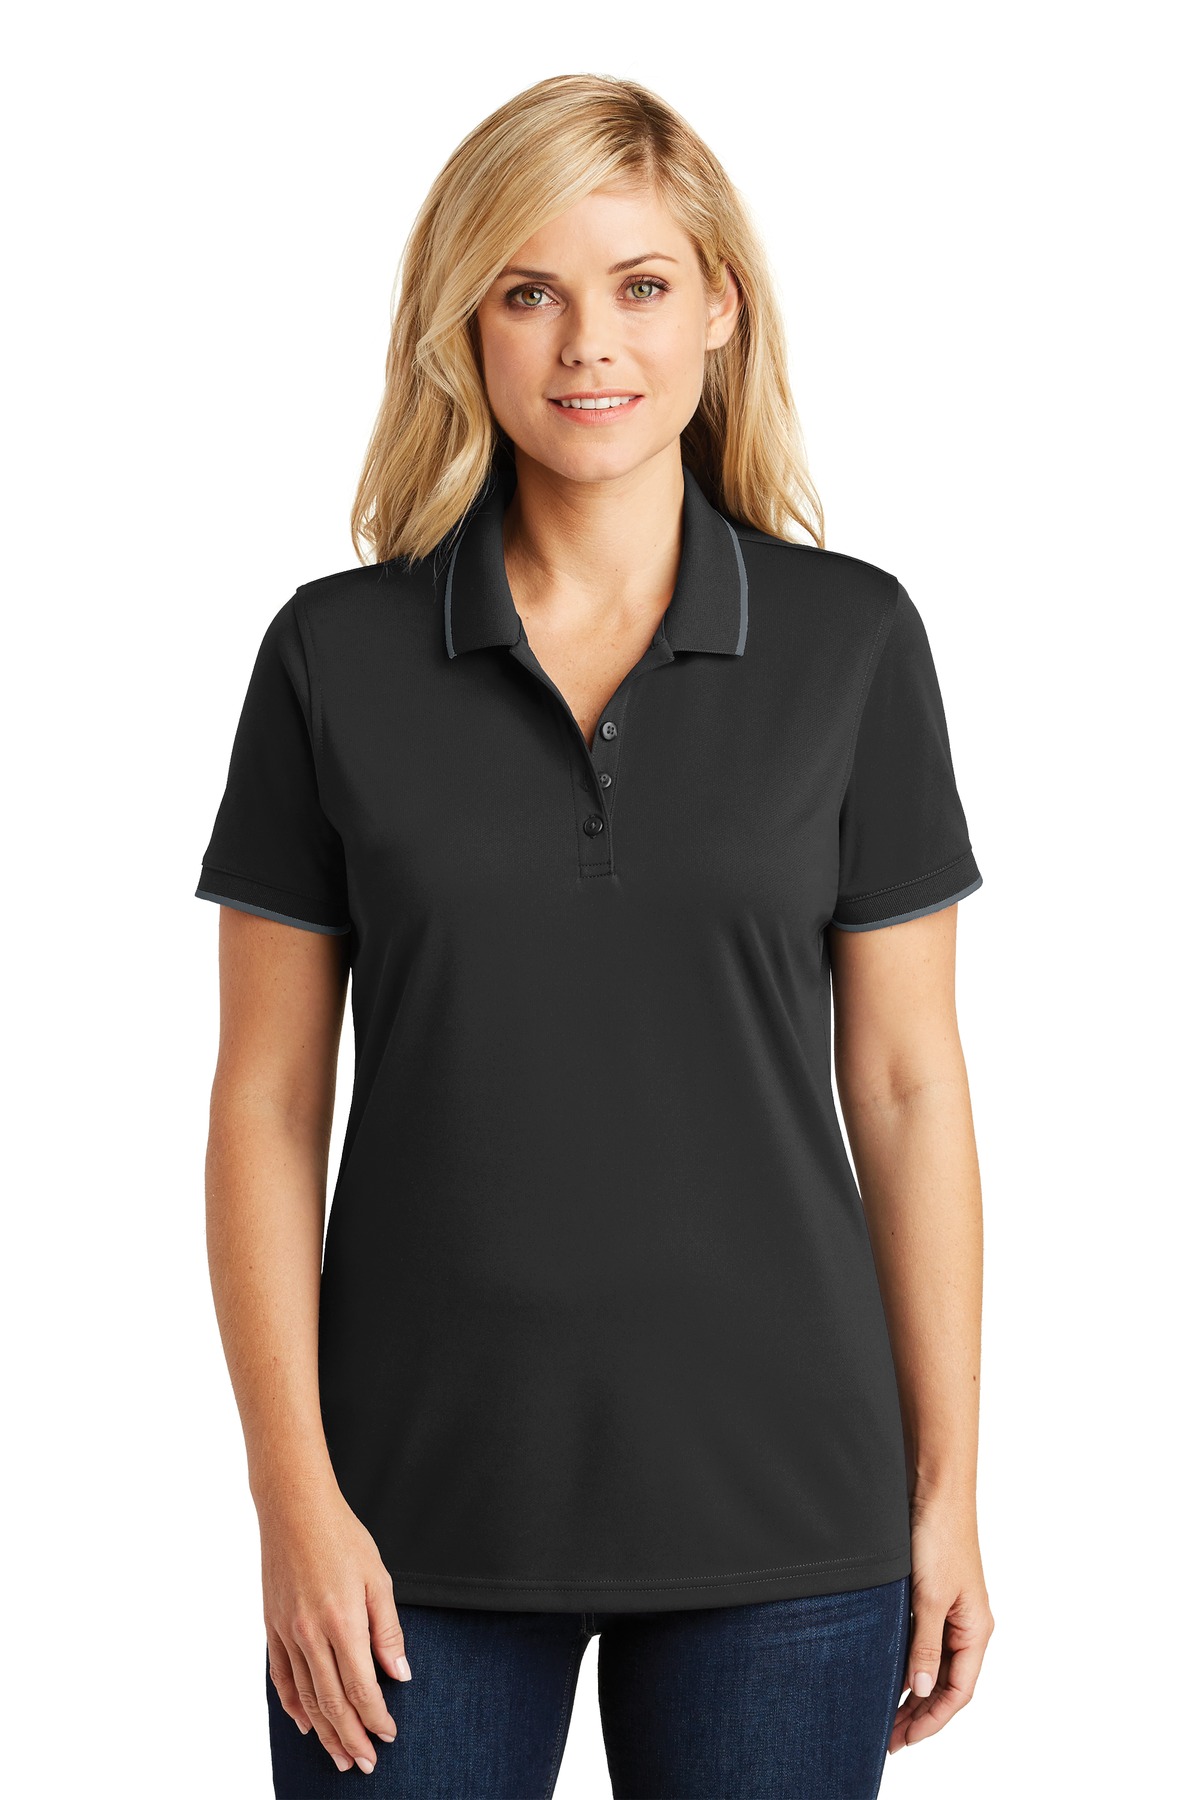 Port Authority Ladies Hospitality Polos & Knits ® Ladies Dry Zone® UV Micro-Mesh Tipped Polo.-Port Authority